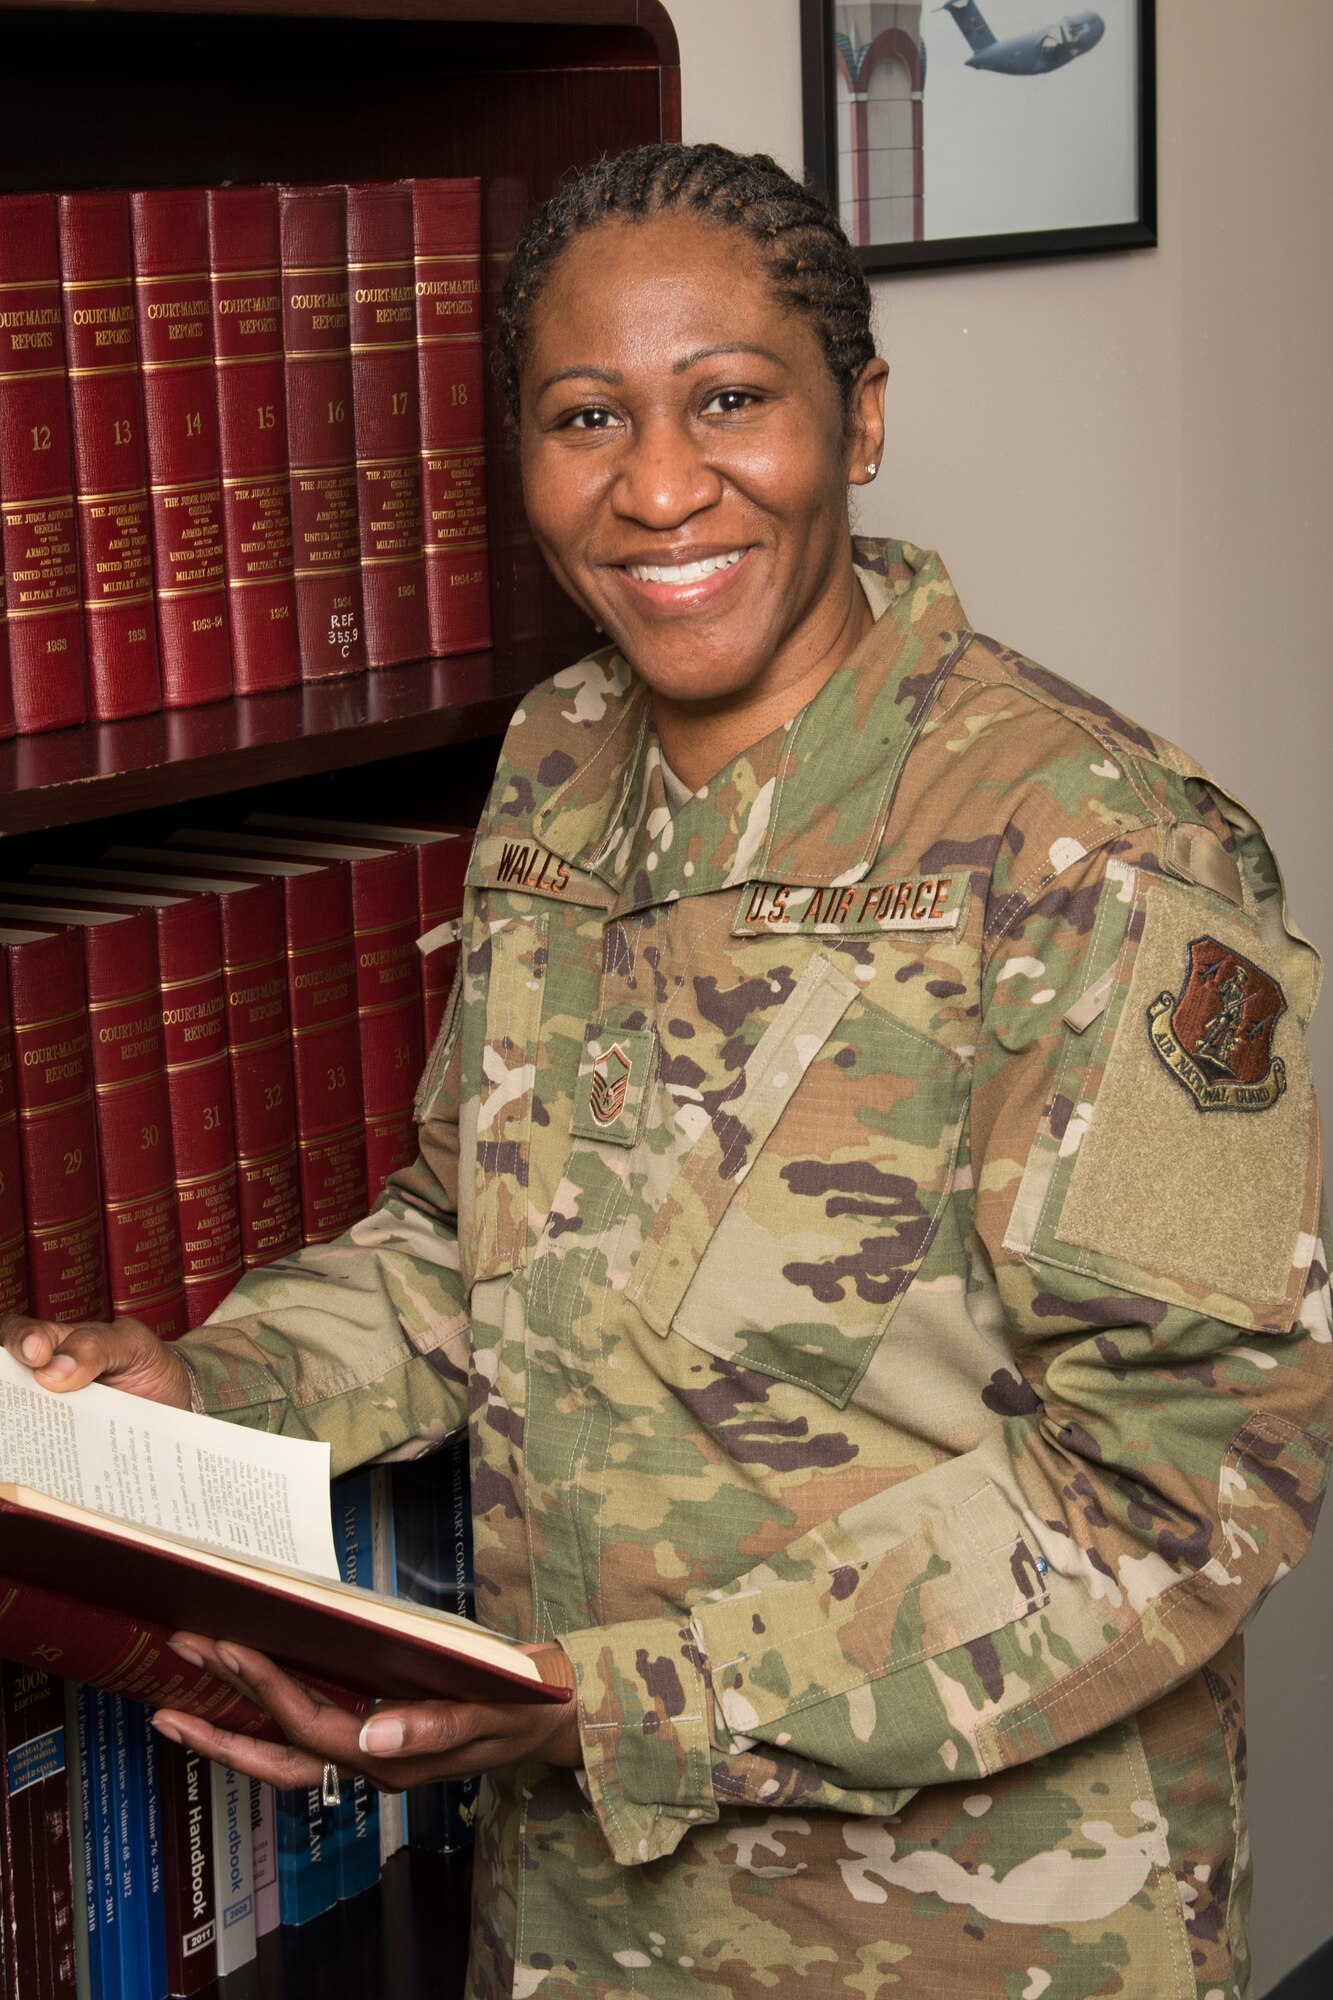 Master Sgt. Sonia Walls is a paralegal for the 167th Airlift Wing's legal office and the 167th Airlift Wing Airman Spotlight for February 2020.